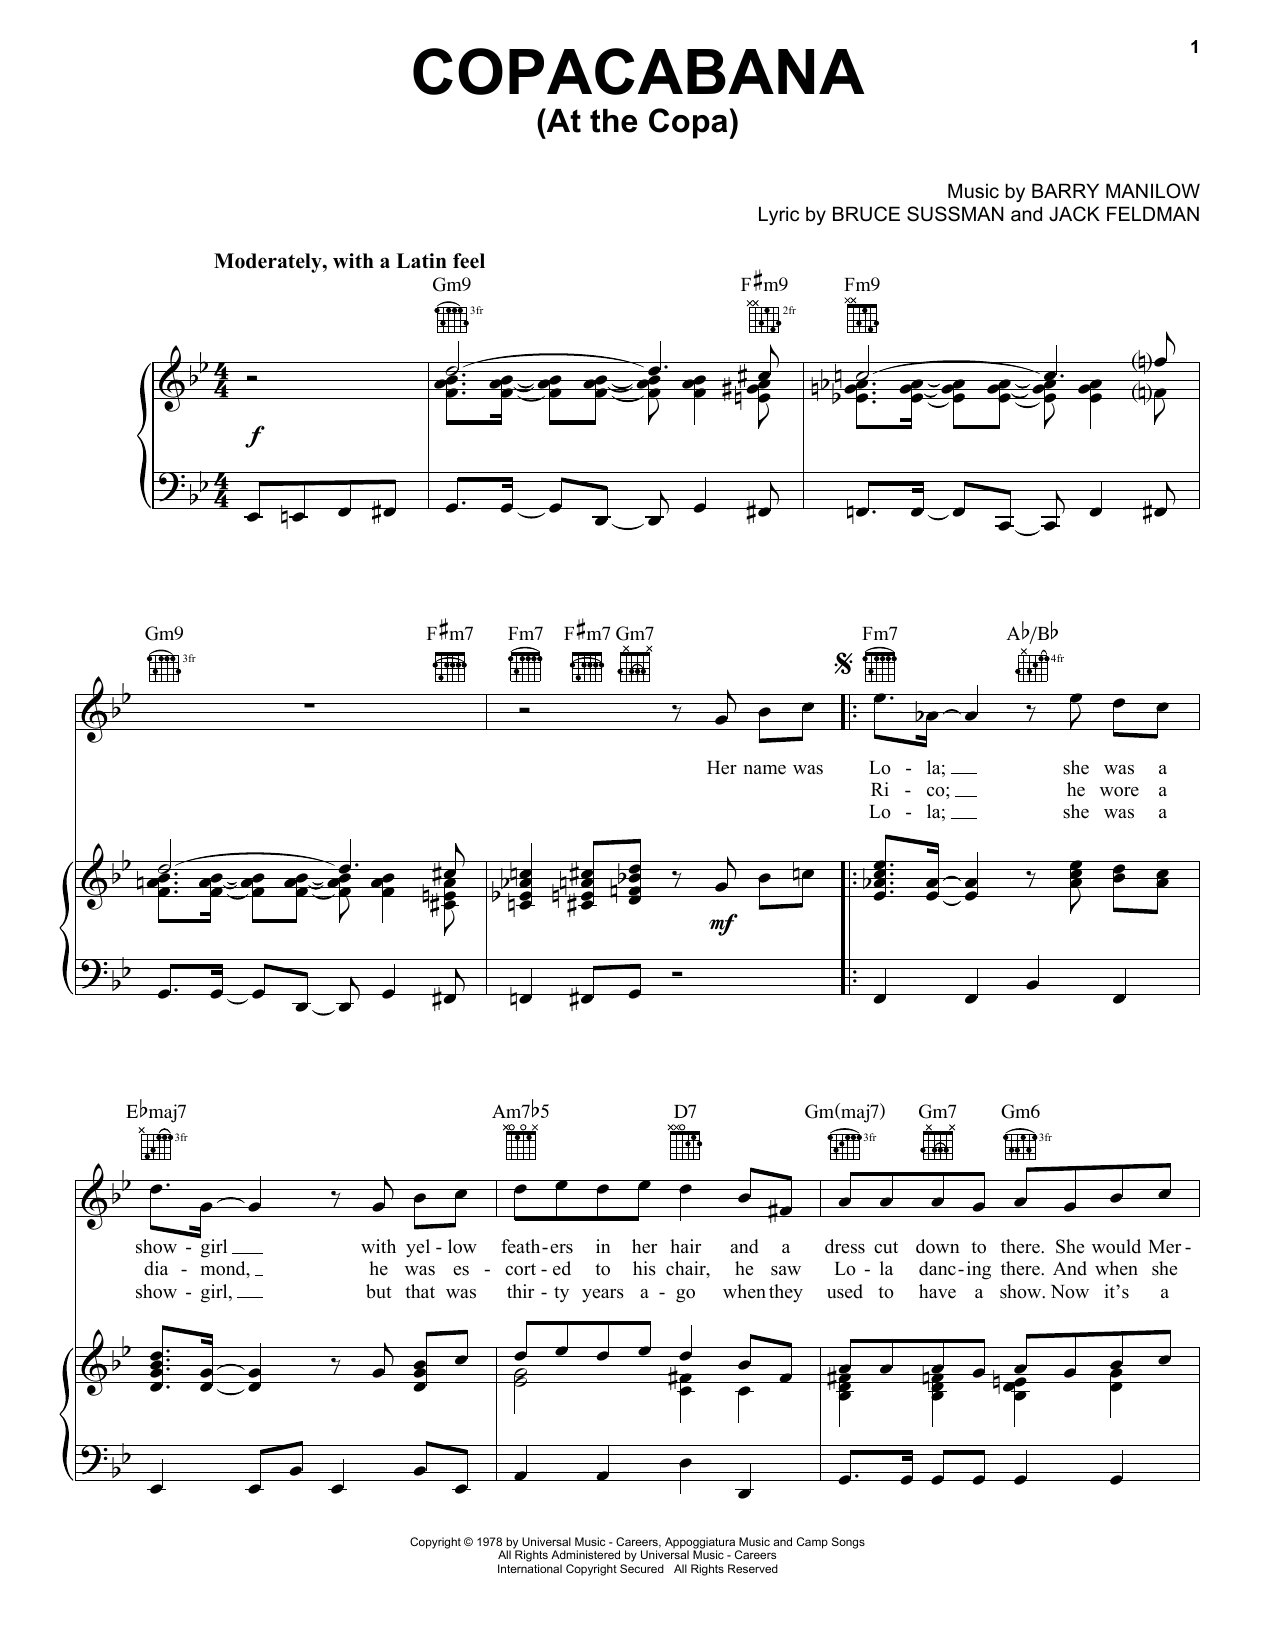 Barry Manilow Copacabana (At The Copa) sheet music notes and chords. Download Printable PDF.